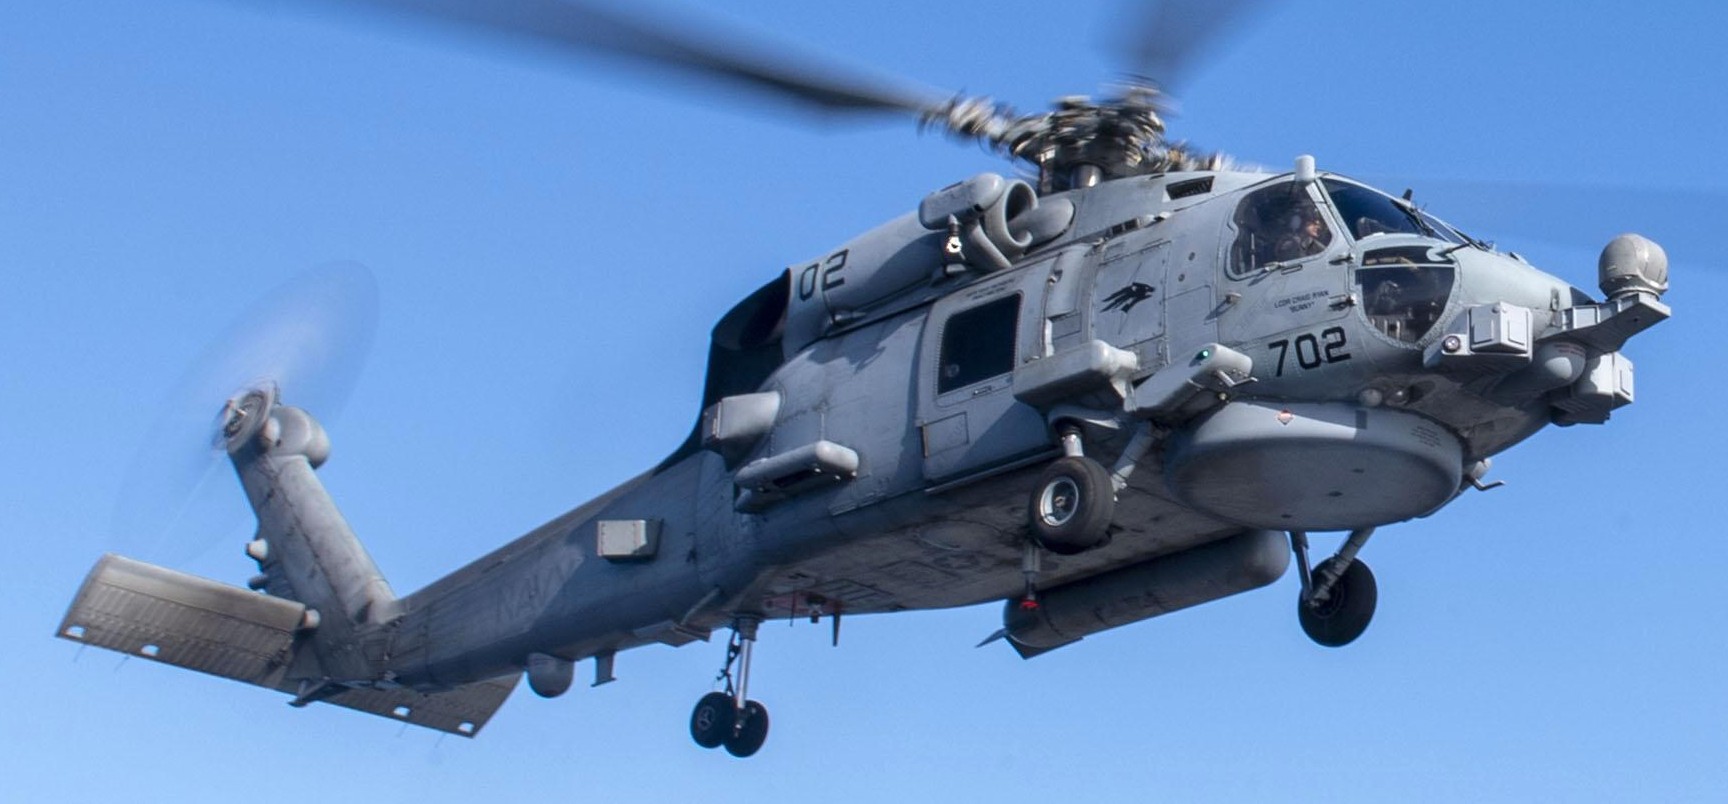 hsm-75 wolfpack helicopter maritime strike squadron us navy mh-60r seahawk 2016 44